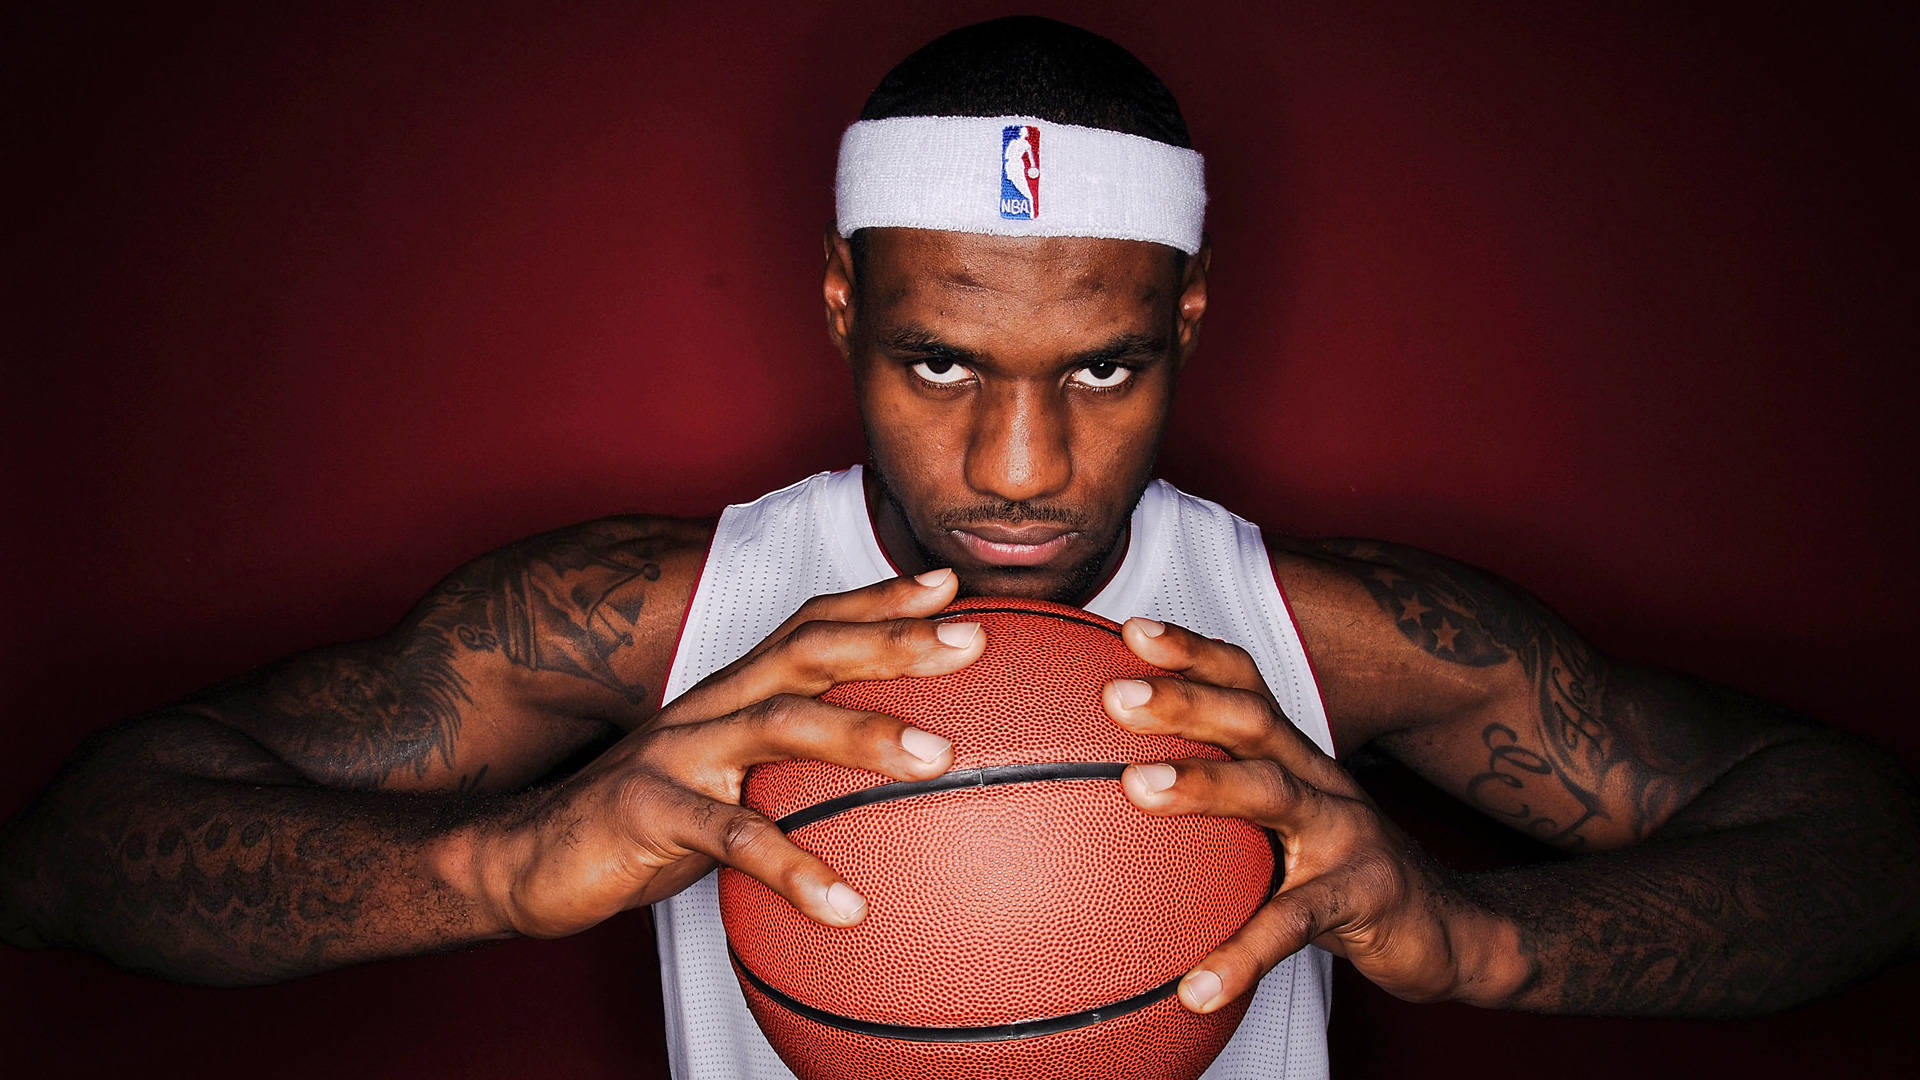 Lebron James Cool Stare With White Jersey Background